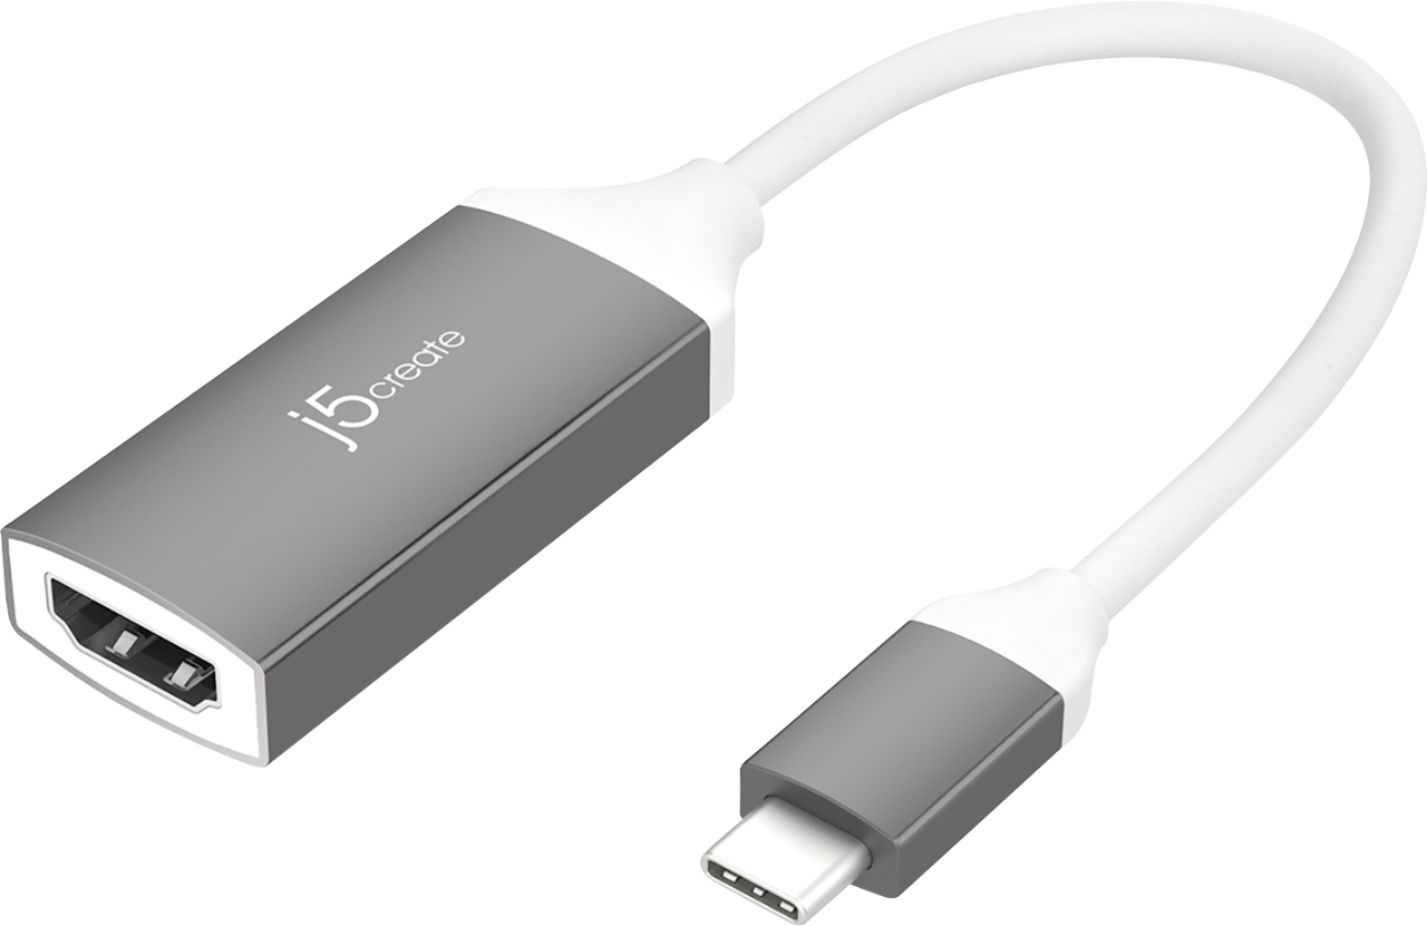 Adaptateur HDMI, USB, AV pour iPad, iPhone 4, iPhone 4S, iPod Touch 4 pas  cher